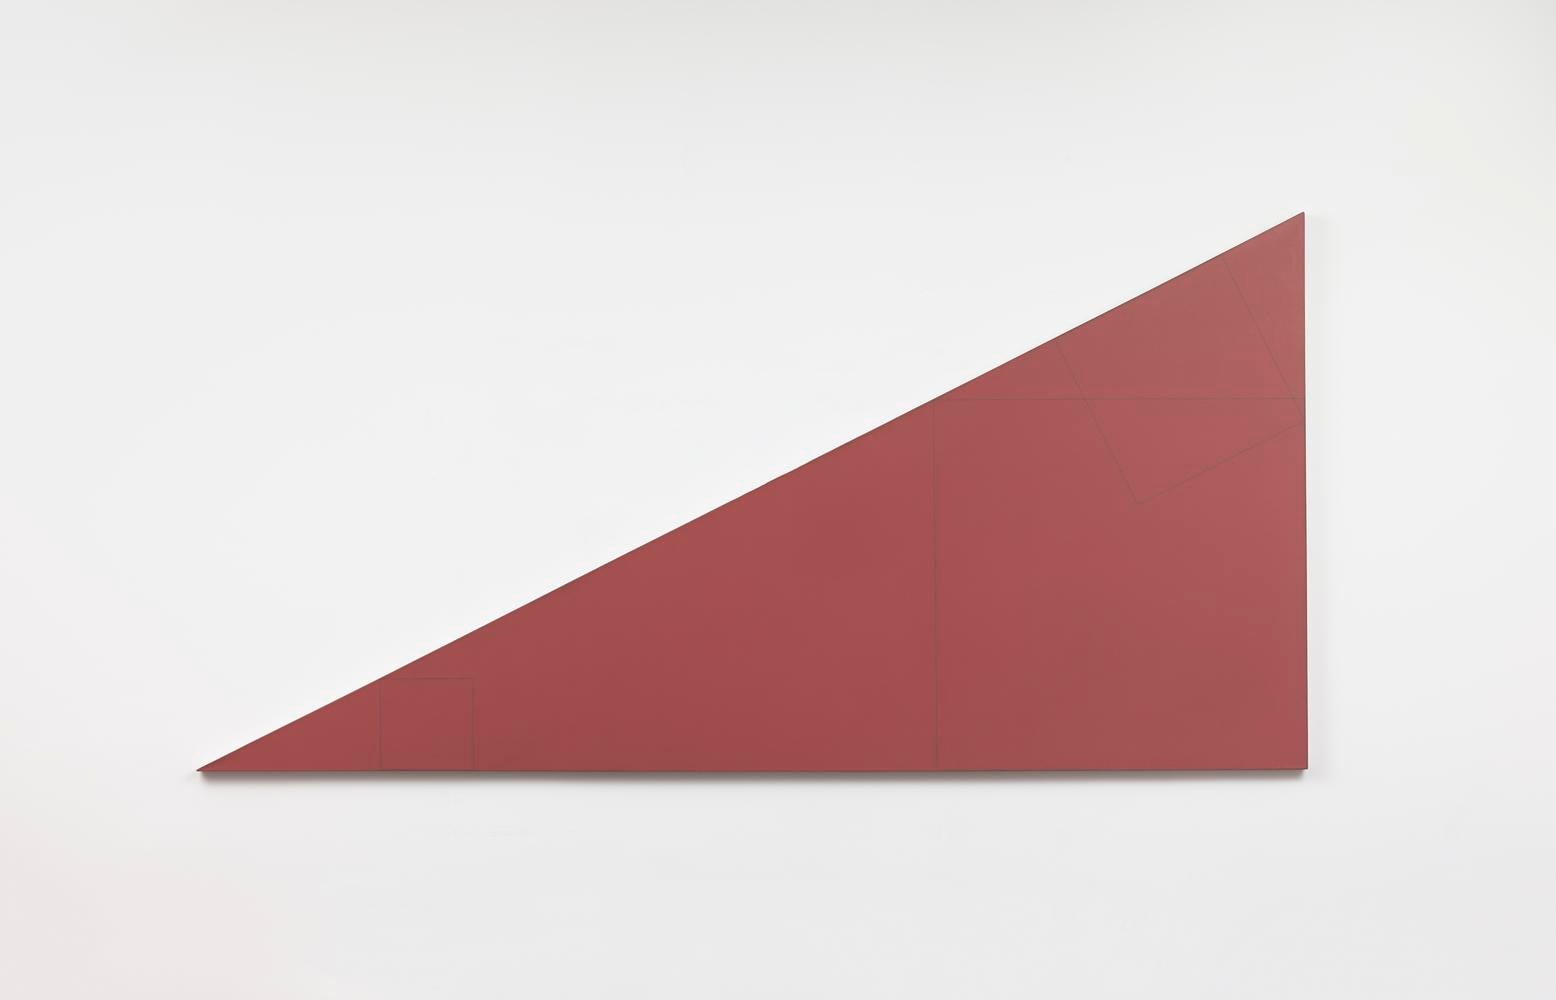 Robert Mangold
Three Squares Within a Triangle
1975-76
acrylic and graphite on canvas
72 x 144 inches (182.9 x 365.8 cm)